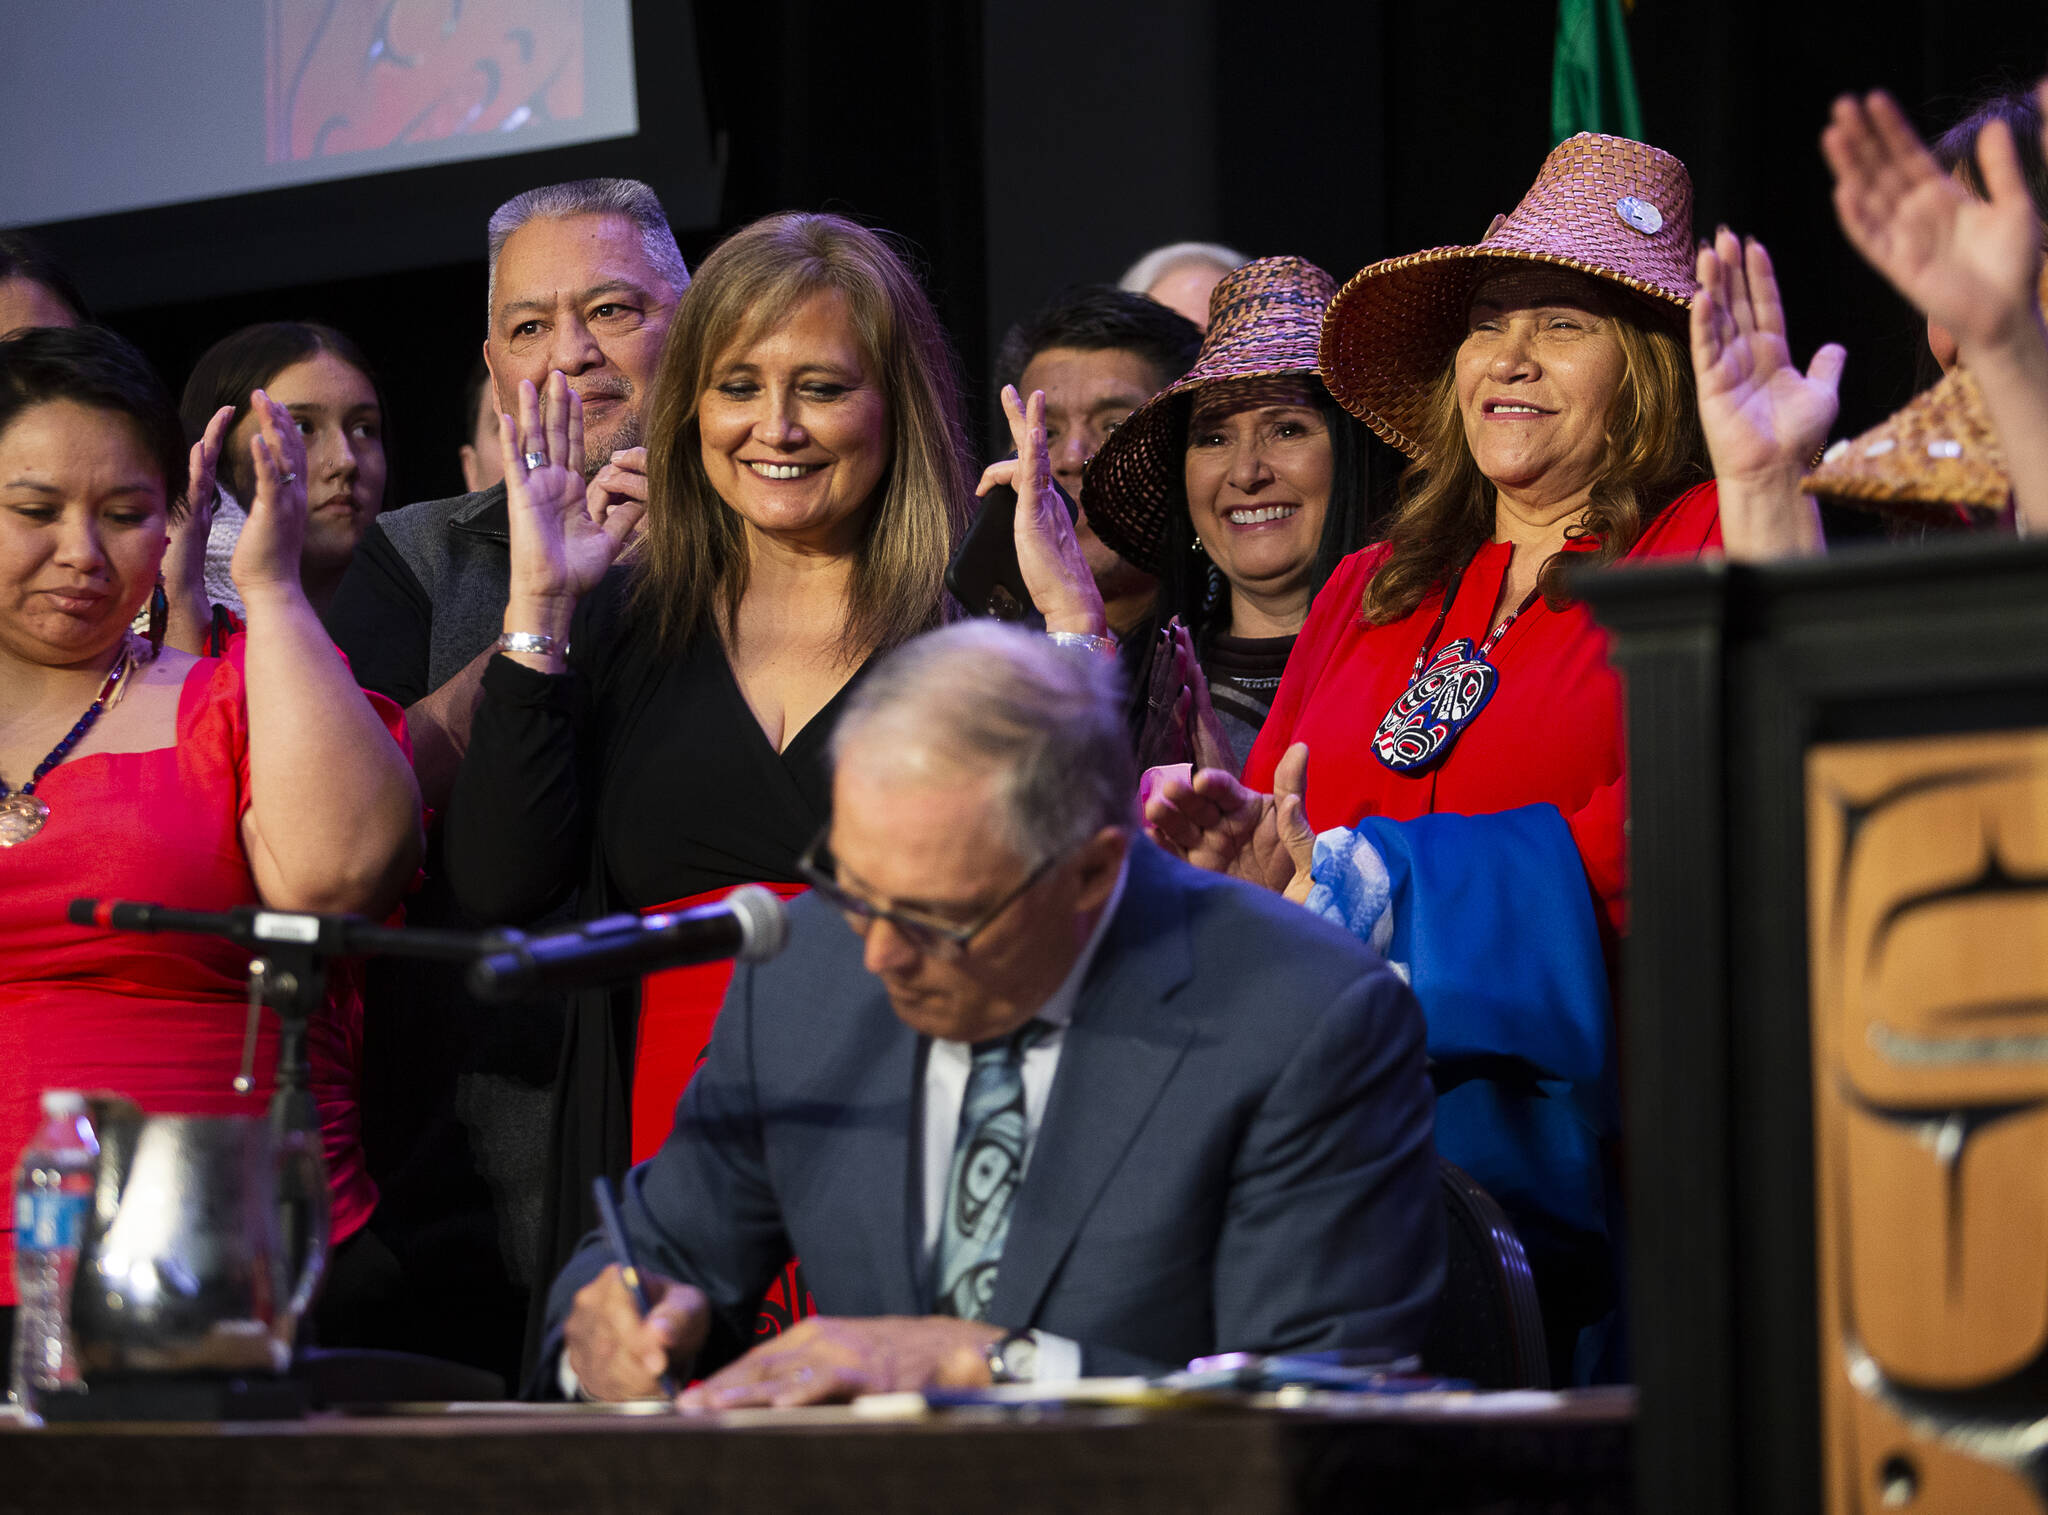 Photo by Olivia Vanni/The Herald
Governor Jay Inslee signs bill HB 1571, a bill relating to protections and services for indigenous persons who are missing, murdered, or survivors of human trafficking, into law at the Tulalip Resort on March 31, 2022.